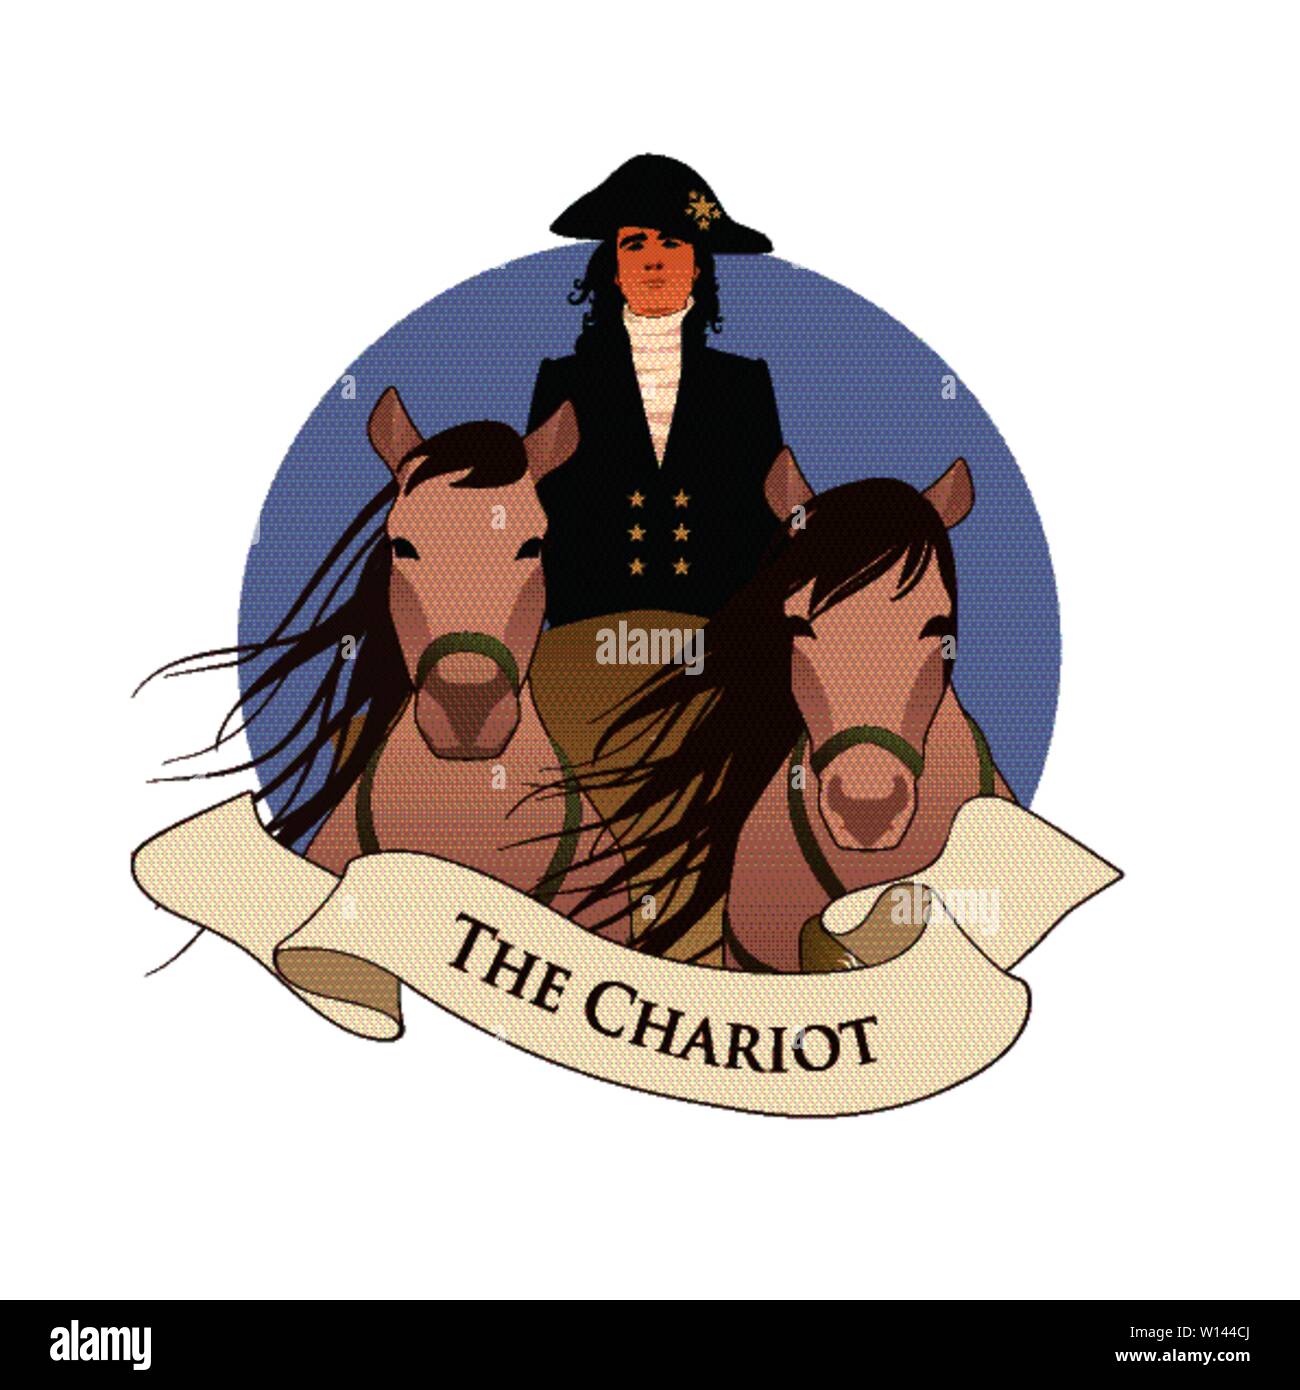 Major Arcana Emblem Tarot Card. The Chariot. Chariot pulled by two horses and driven by an elegant coachman in livery and hat, isolated on white backg Stock Vector